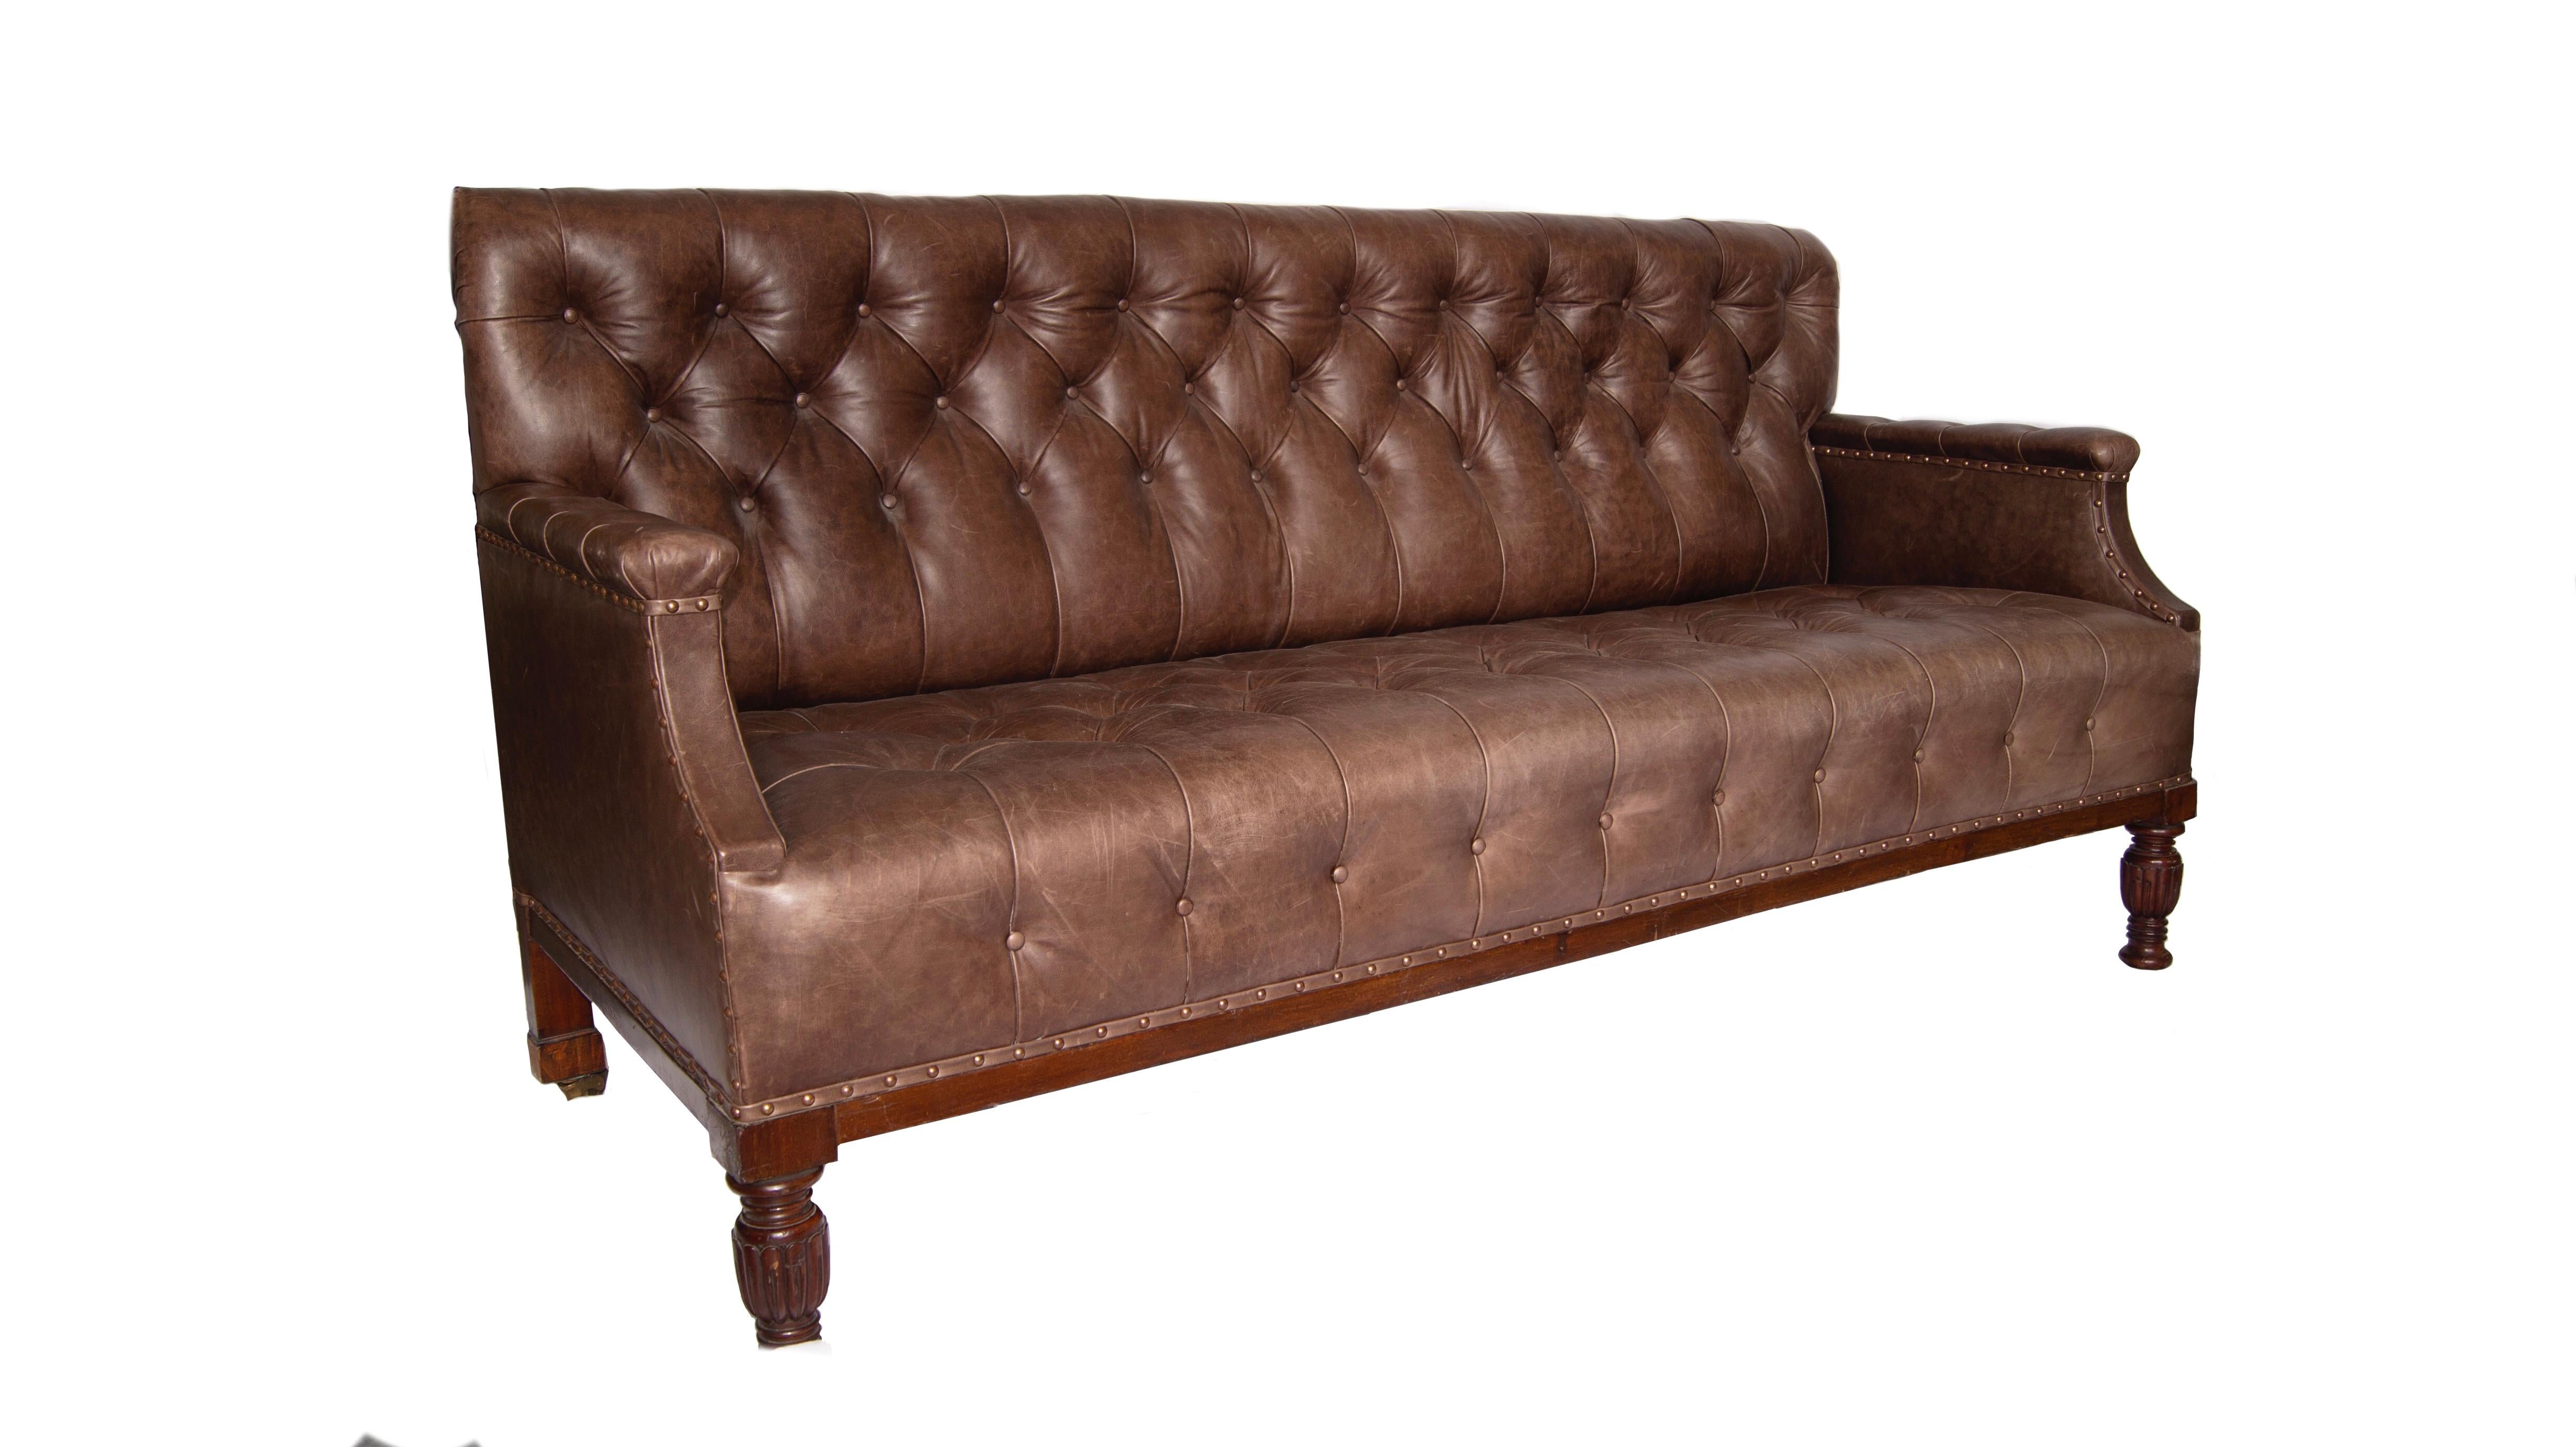 Turned George IV Leather Club Sofa, Early 19th Century